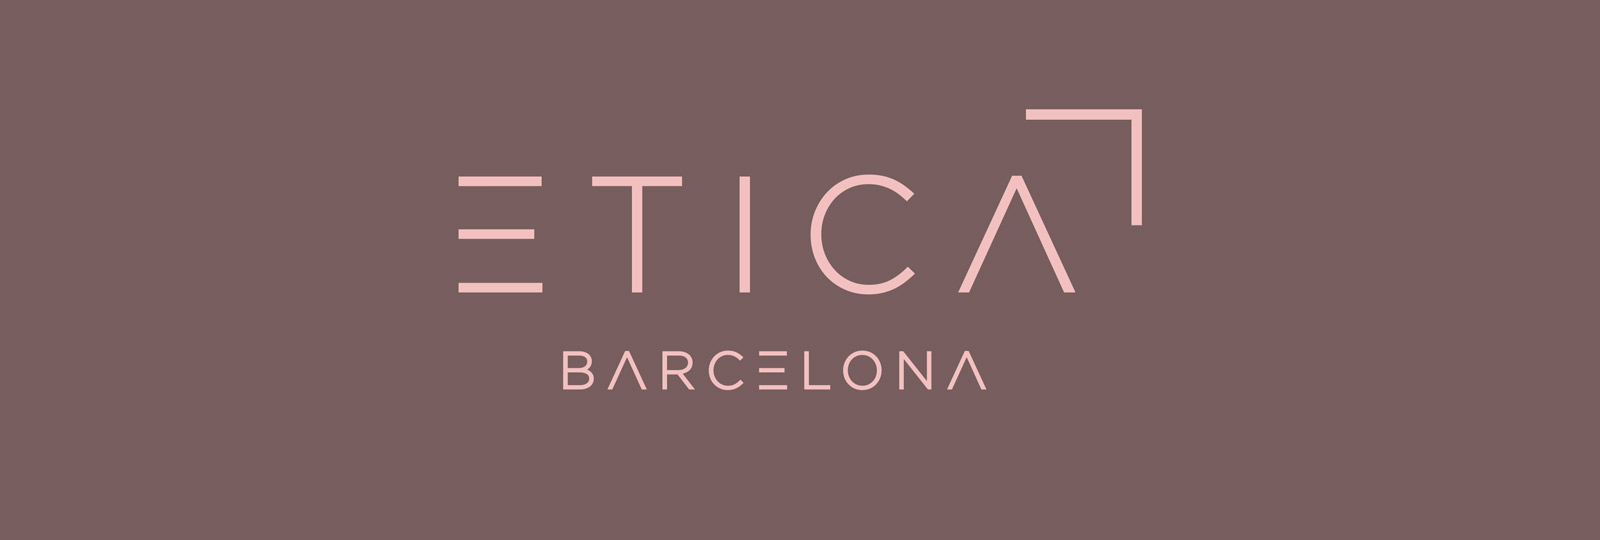 Graphic and creative design of logo restyling and branding for a real state company ETICA BARCELONA